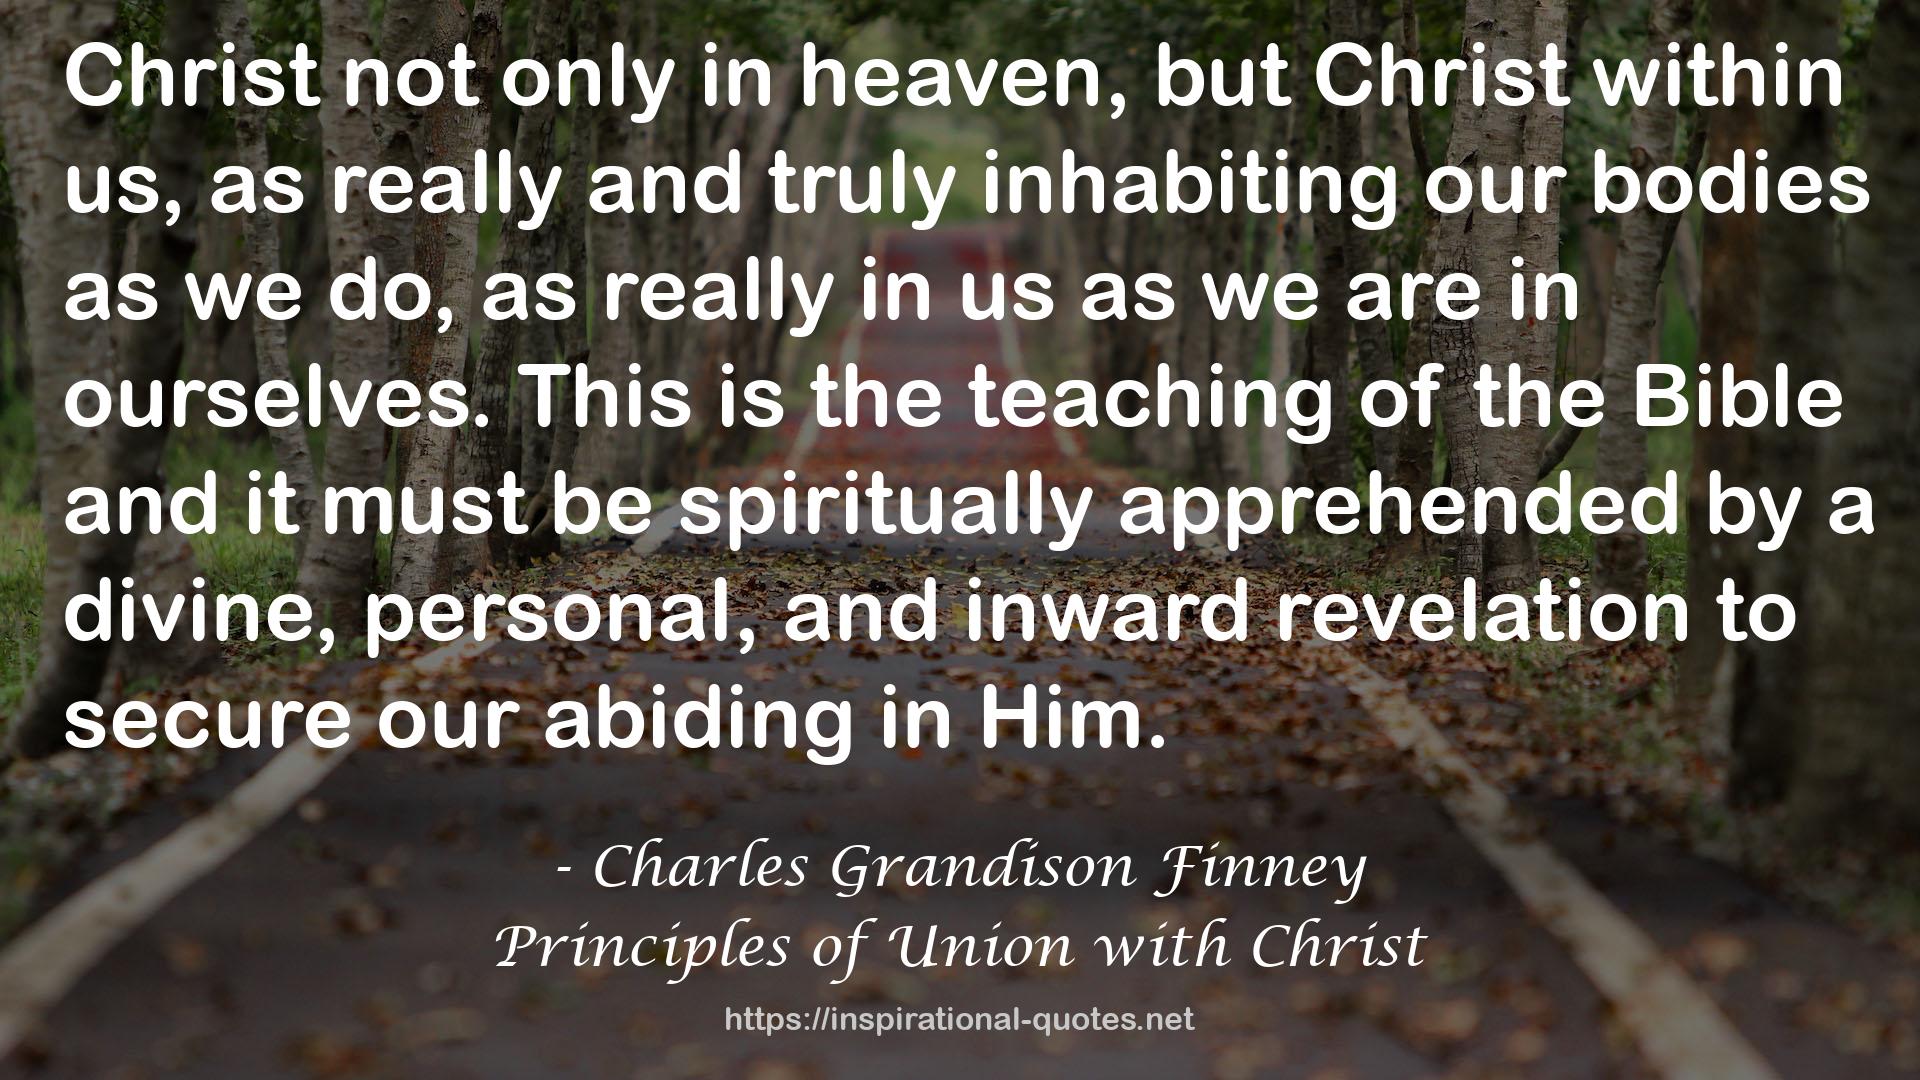 Principles of Union with Christ QUOTES